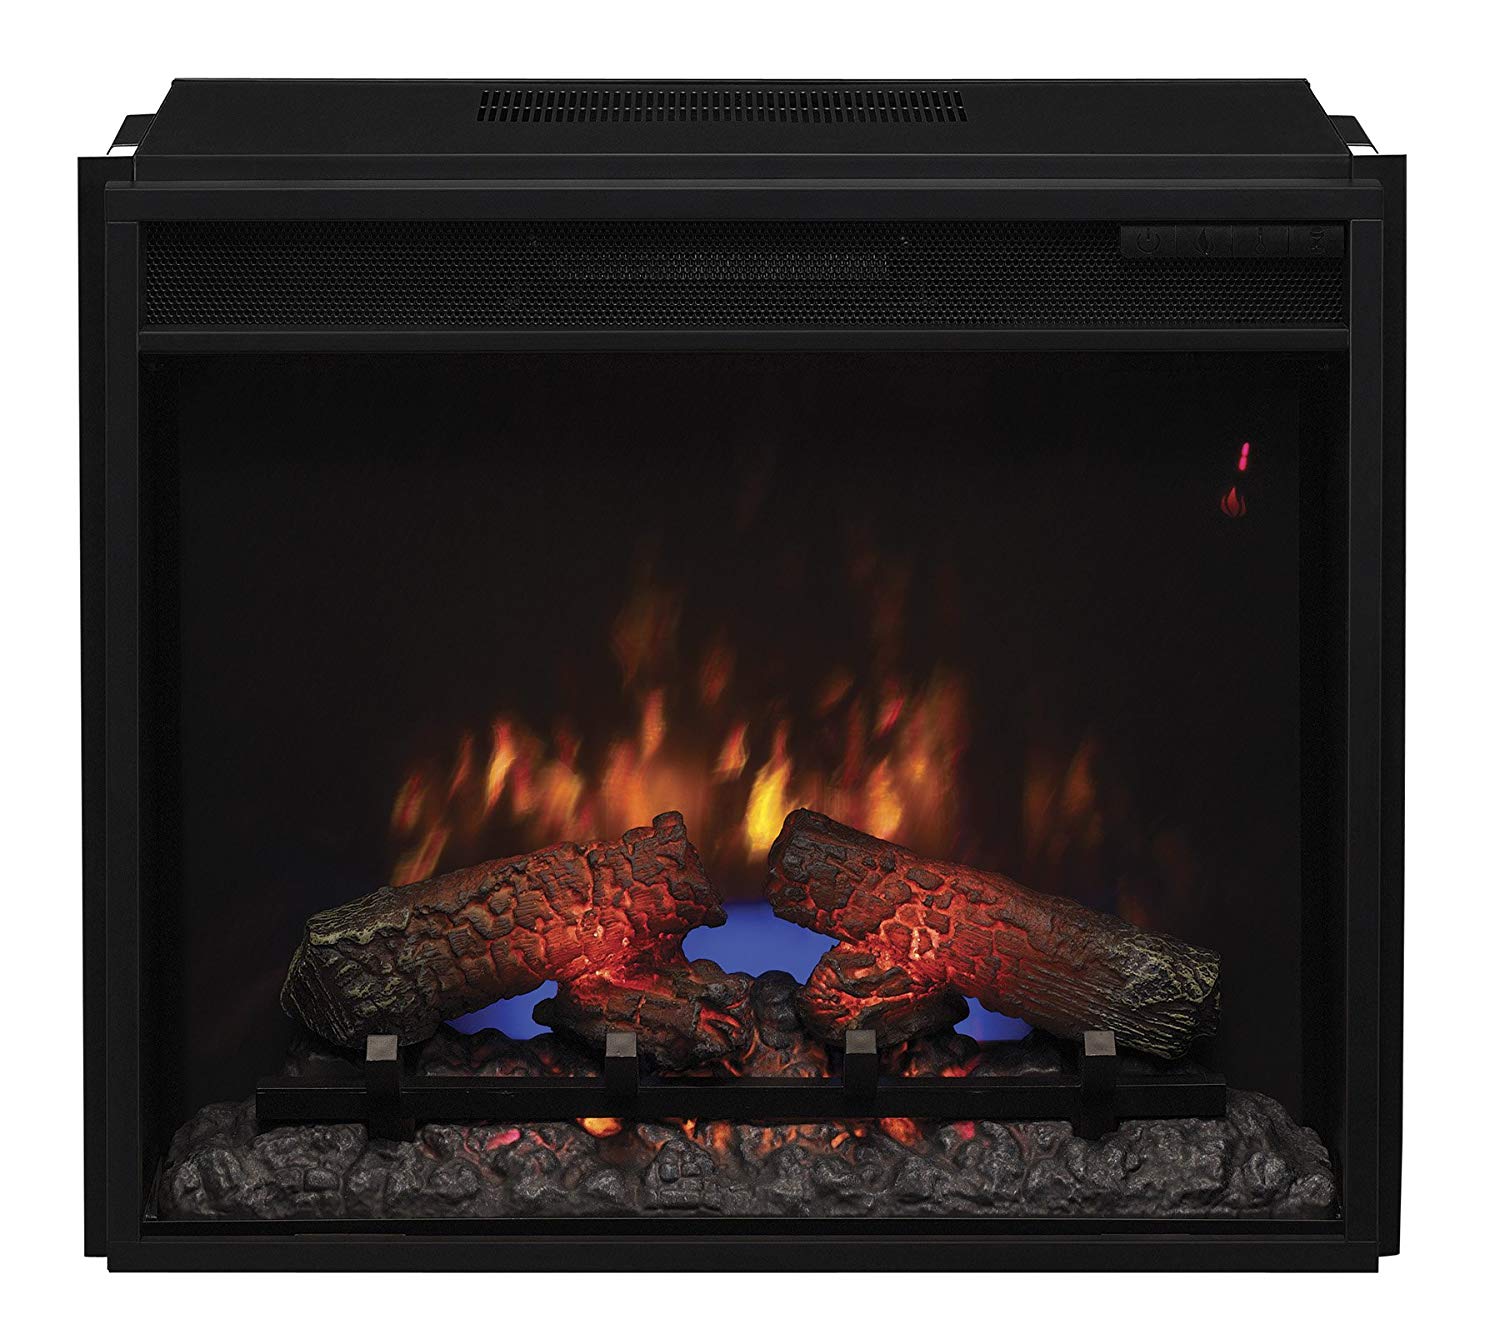 Large Corner Electric Fireplace New Classicflame 23ef031grp 23" Electric Fireplace Insert with Safer Plug